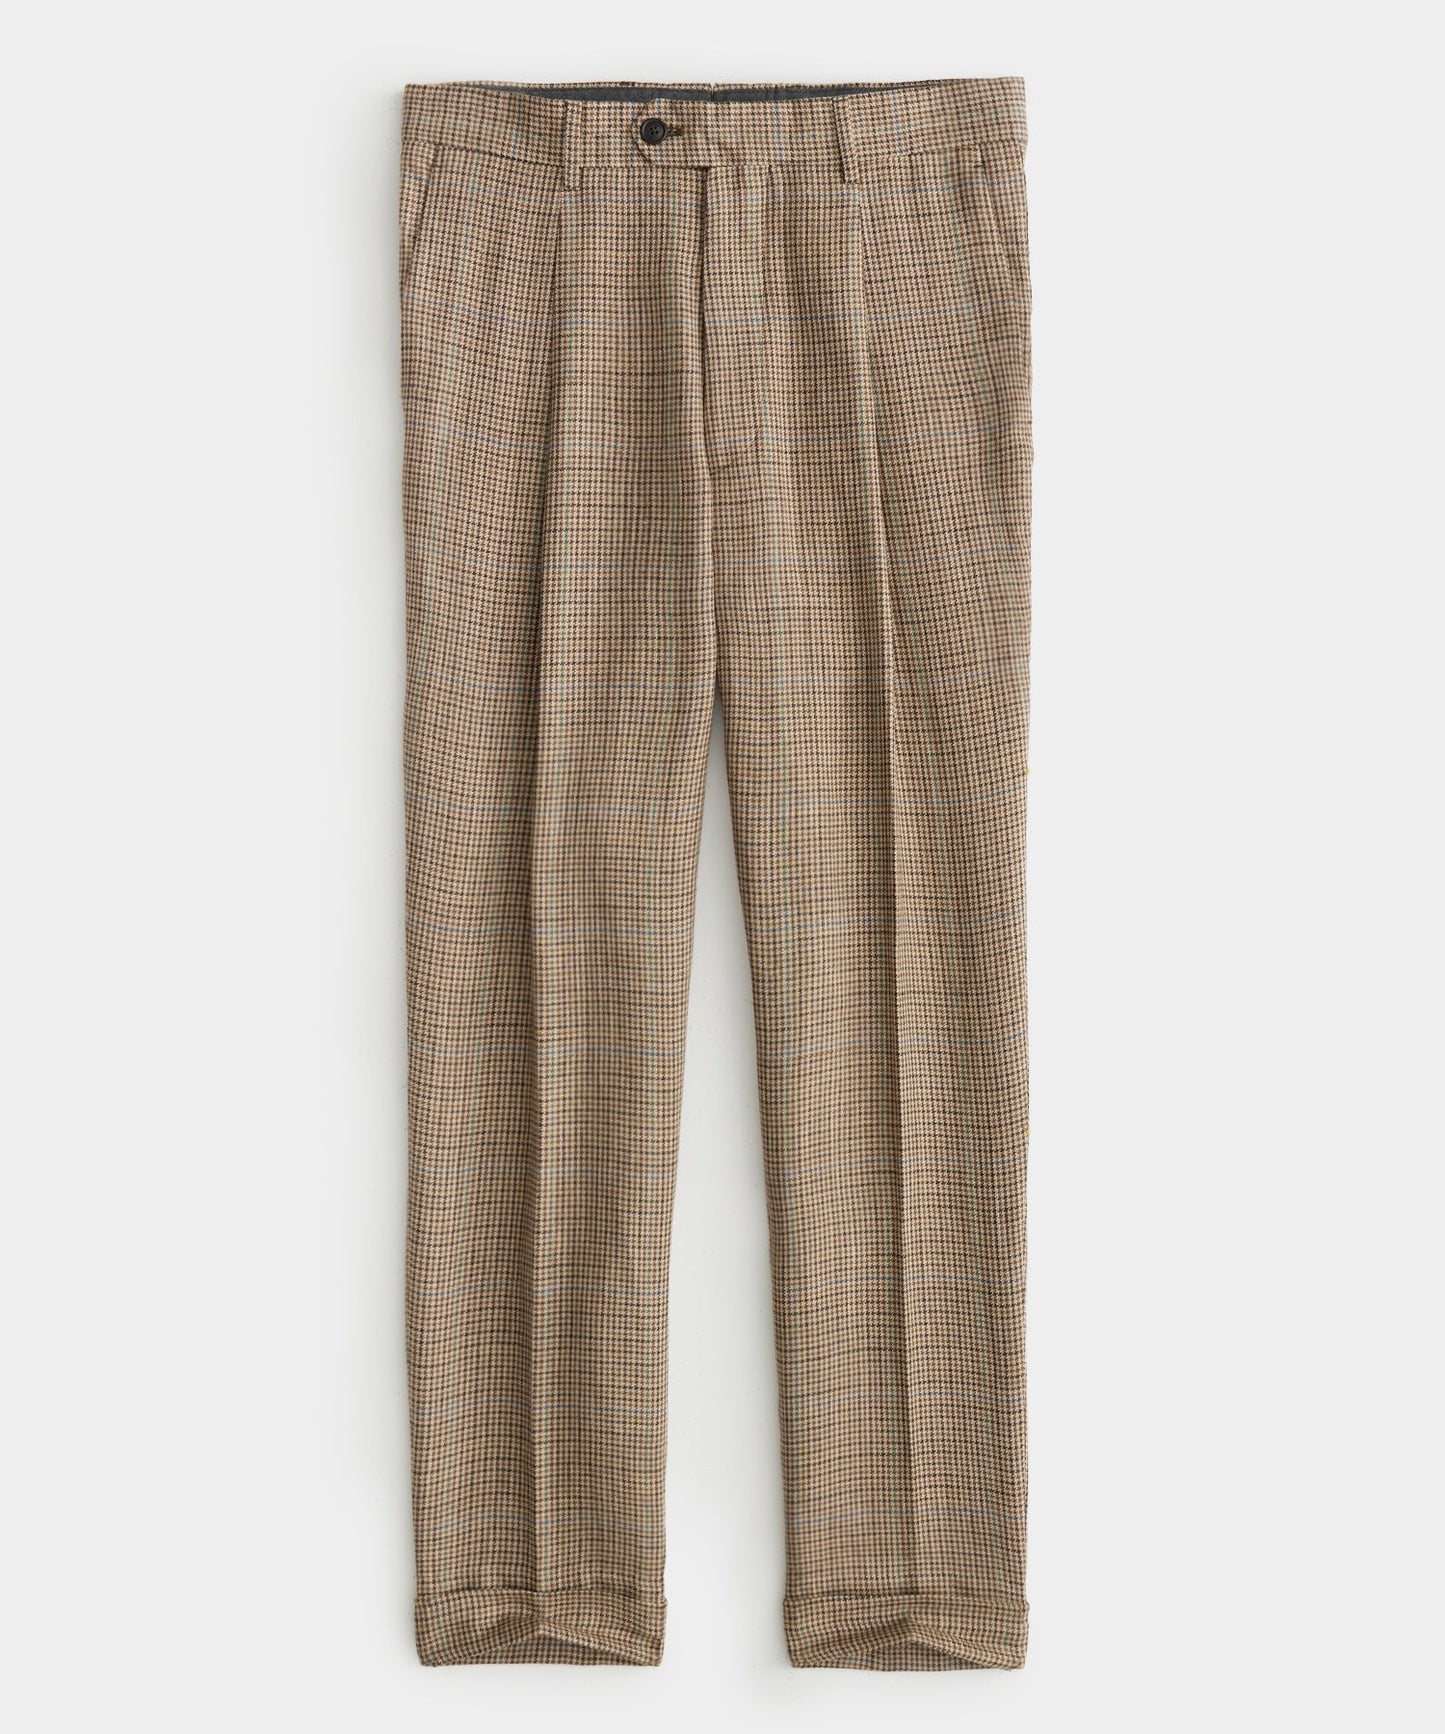 Todd Snyder - TODD SNYDER HOUNDSTOOTH MADISON PANT IN BROWN - Rent With Thred